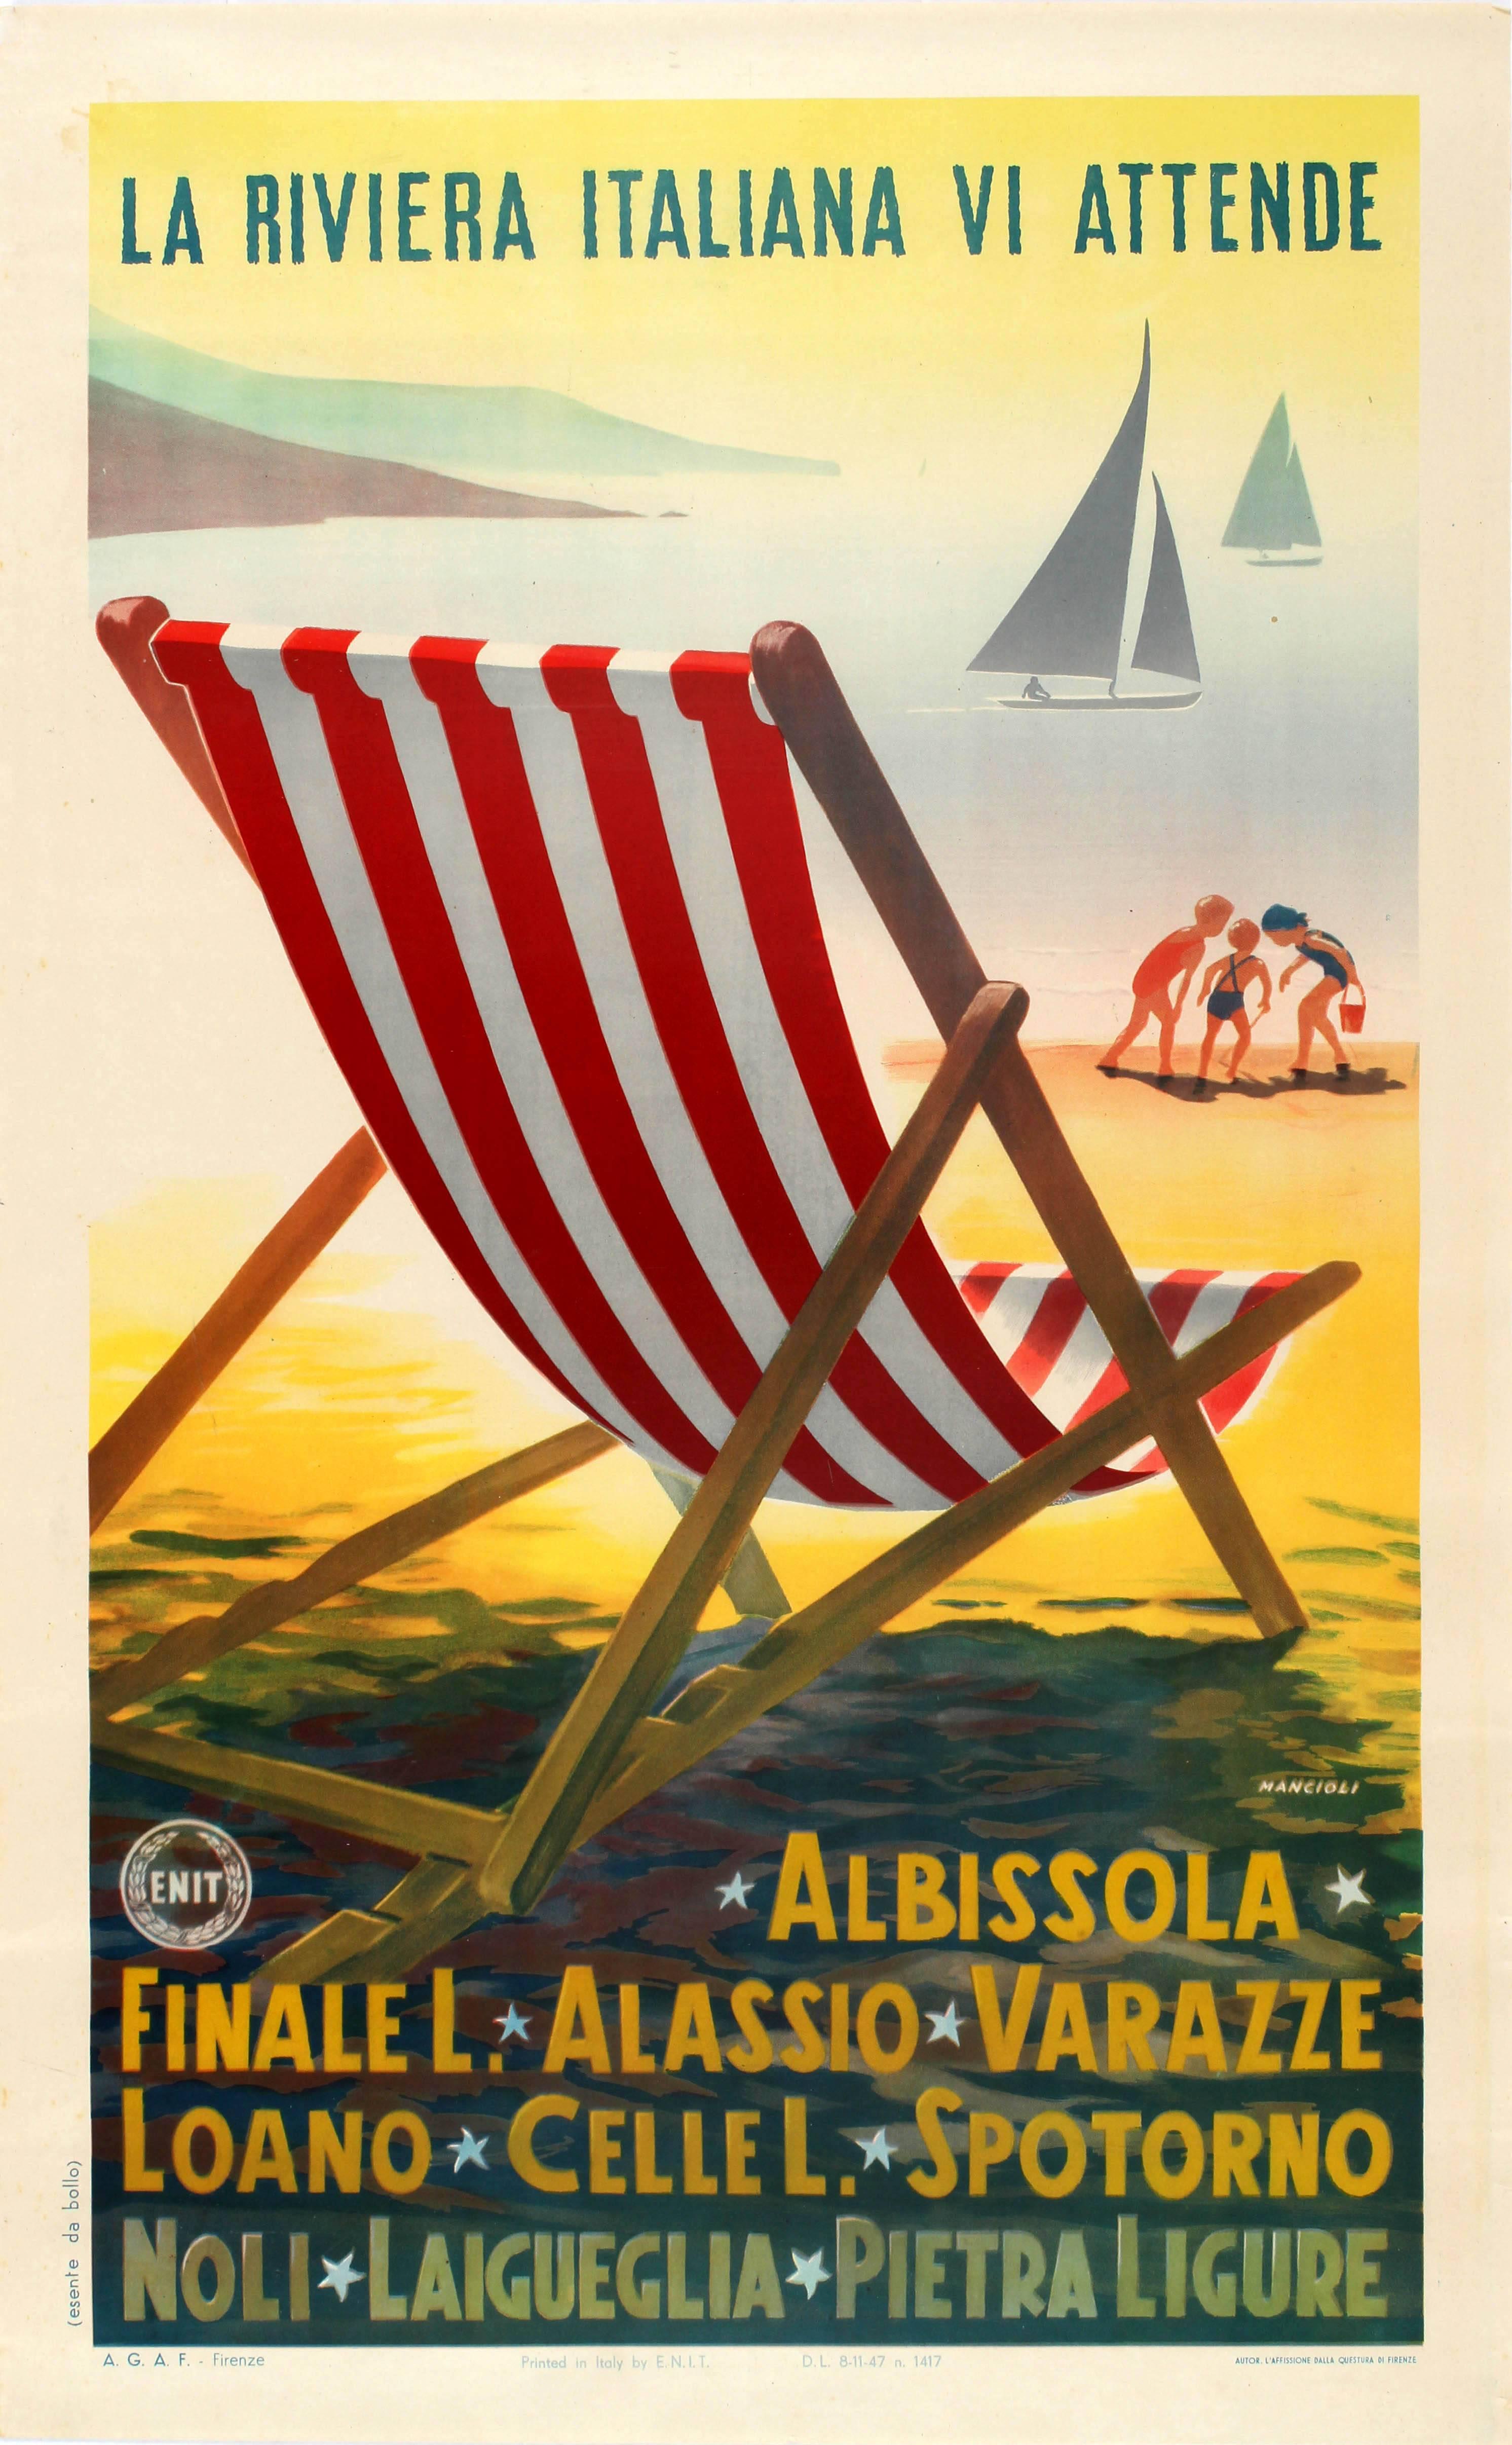 Unknown Print - Original Vintage ENIT Travel Advertising Poster - The Italian Riviera Awaits You